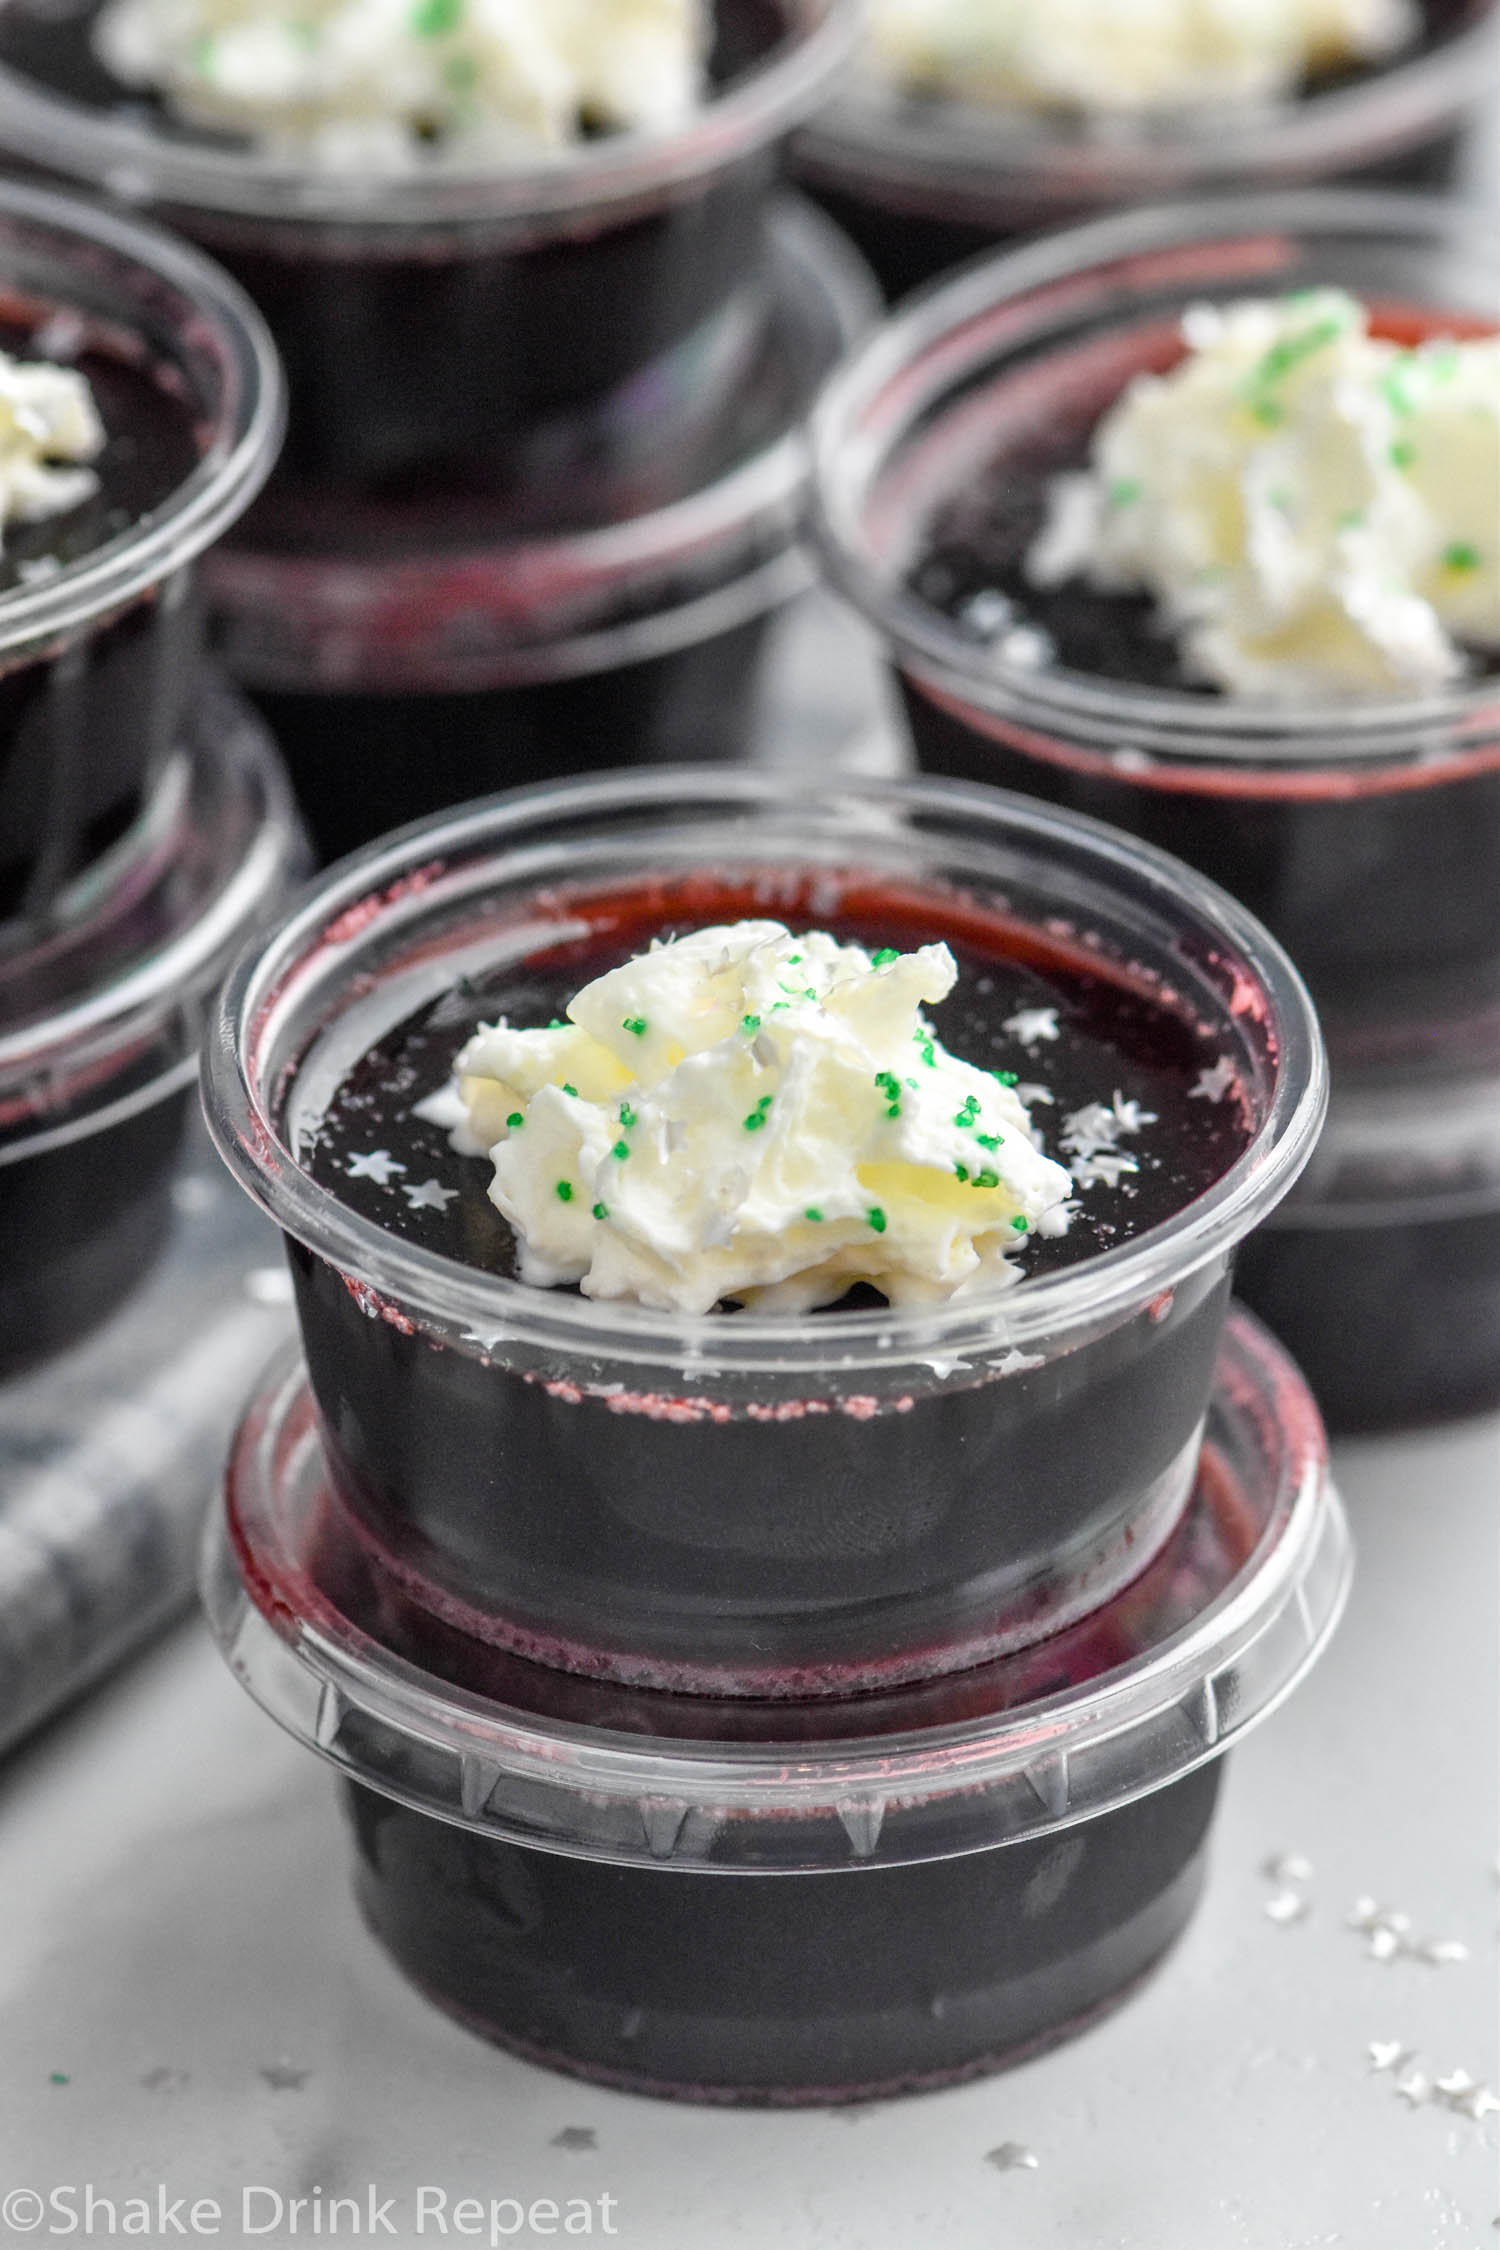 Overhead photo of Drunk Witch Jell-O Shots garnished with whipped cream and sprinkles.